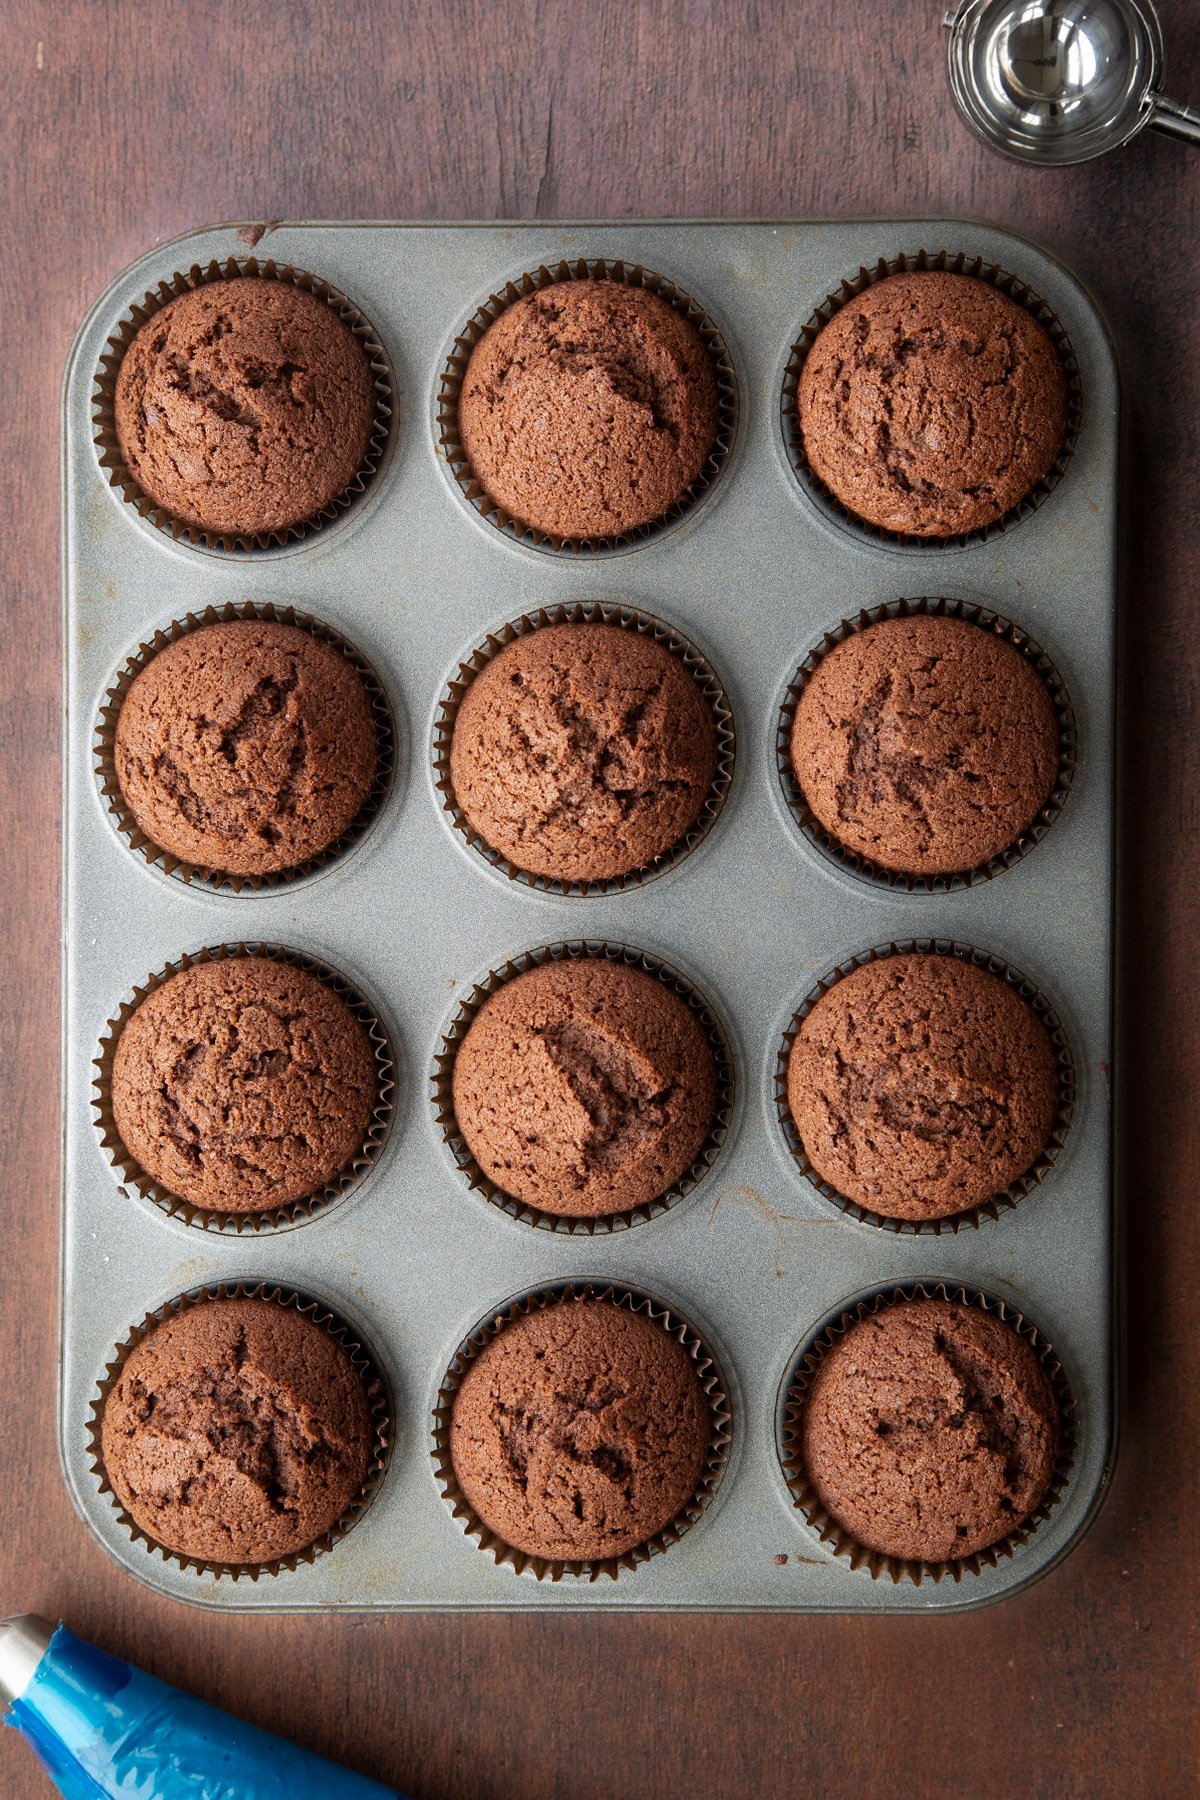 Baileys chocolate cupcakes, baked in a 12 hole muffin tray.